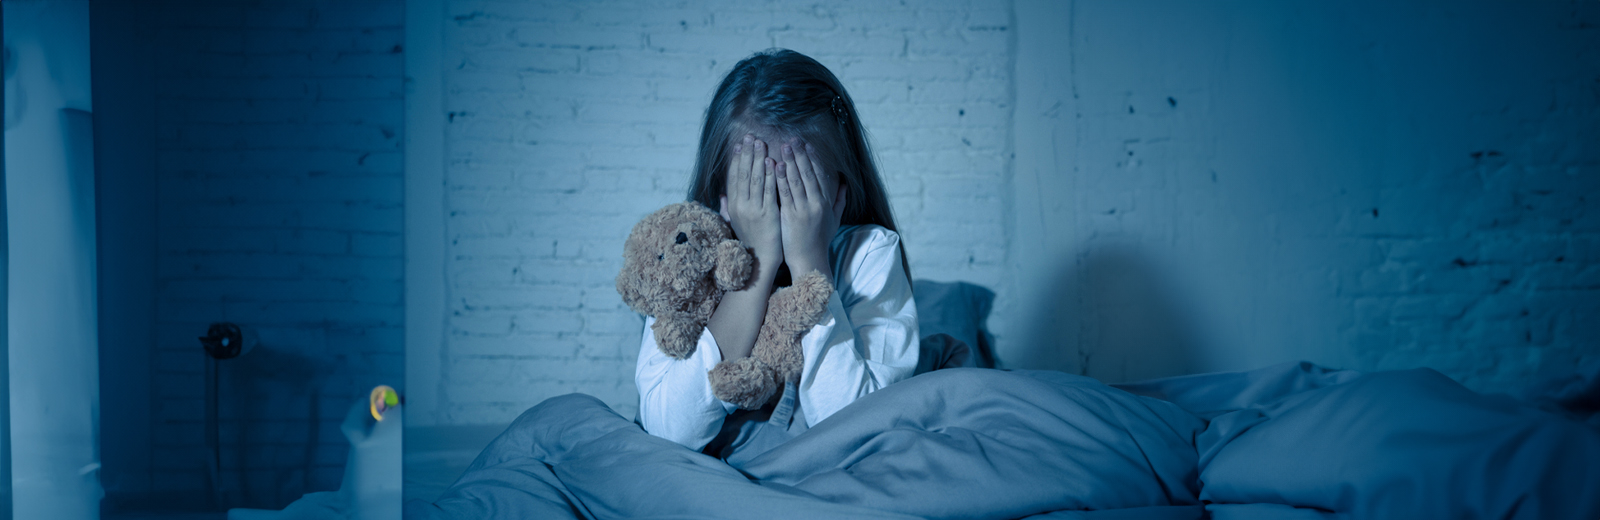 Somniphobia (Fear of sleep): Symptoms, causes, treatment, and more